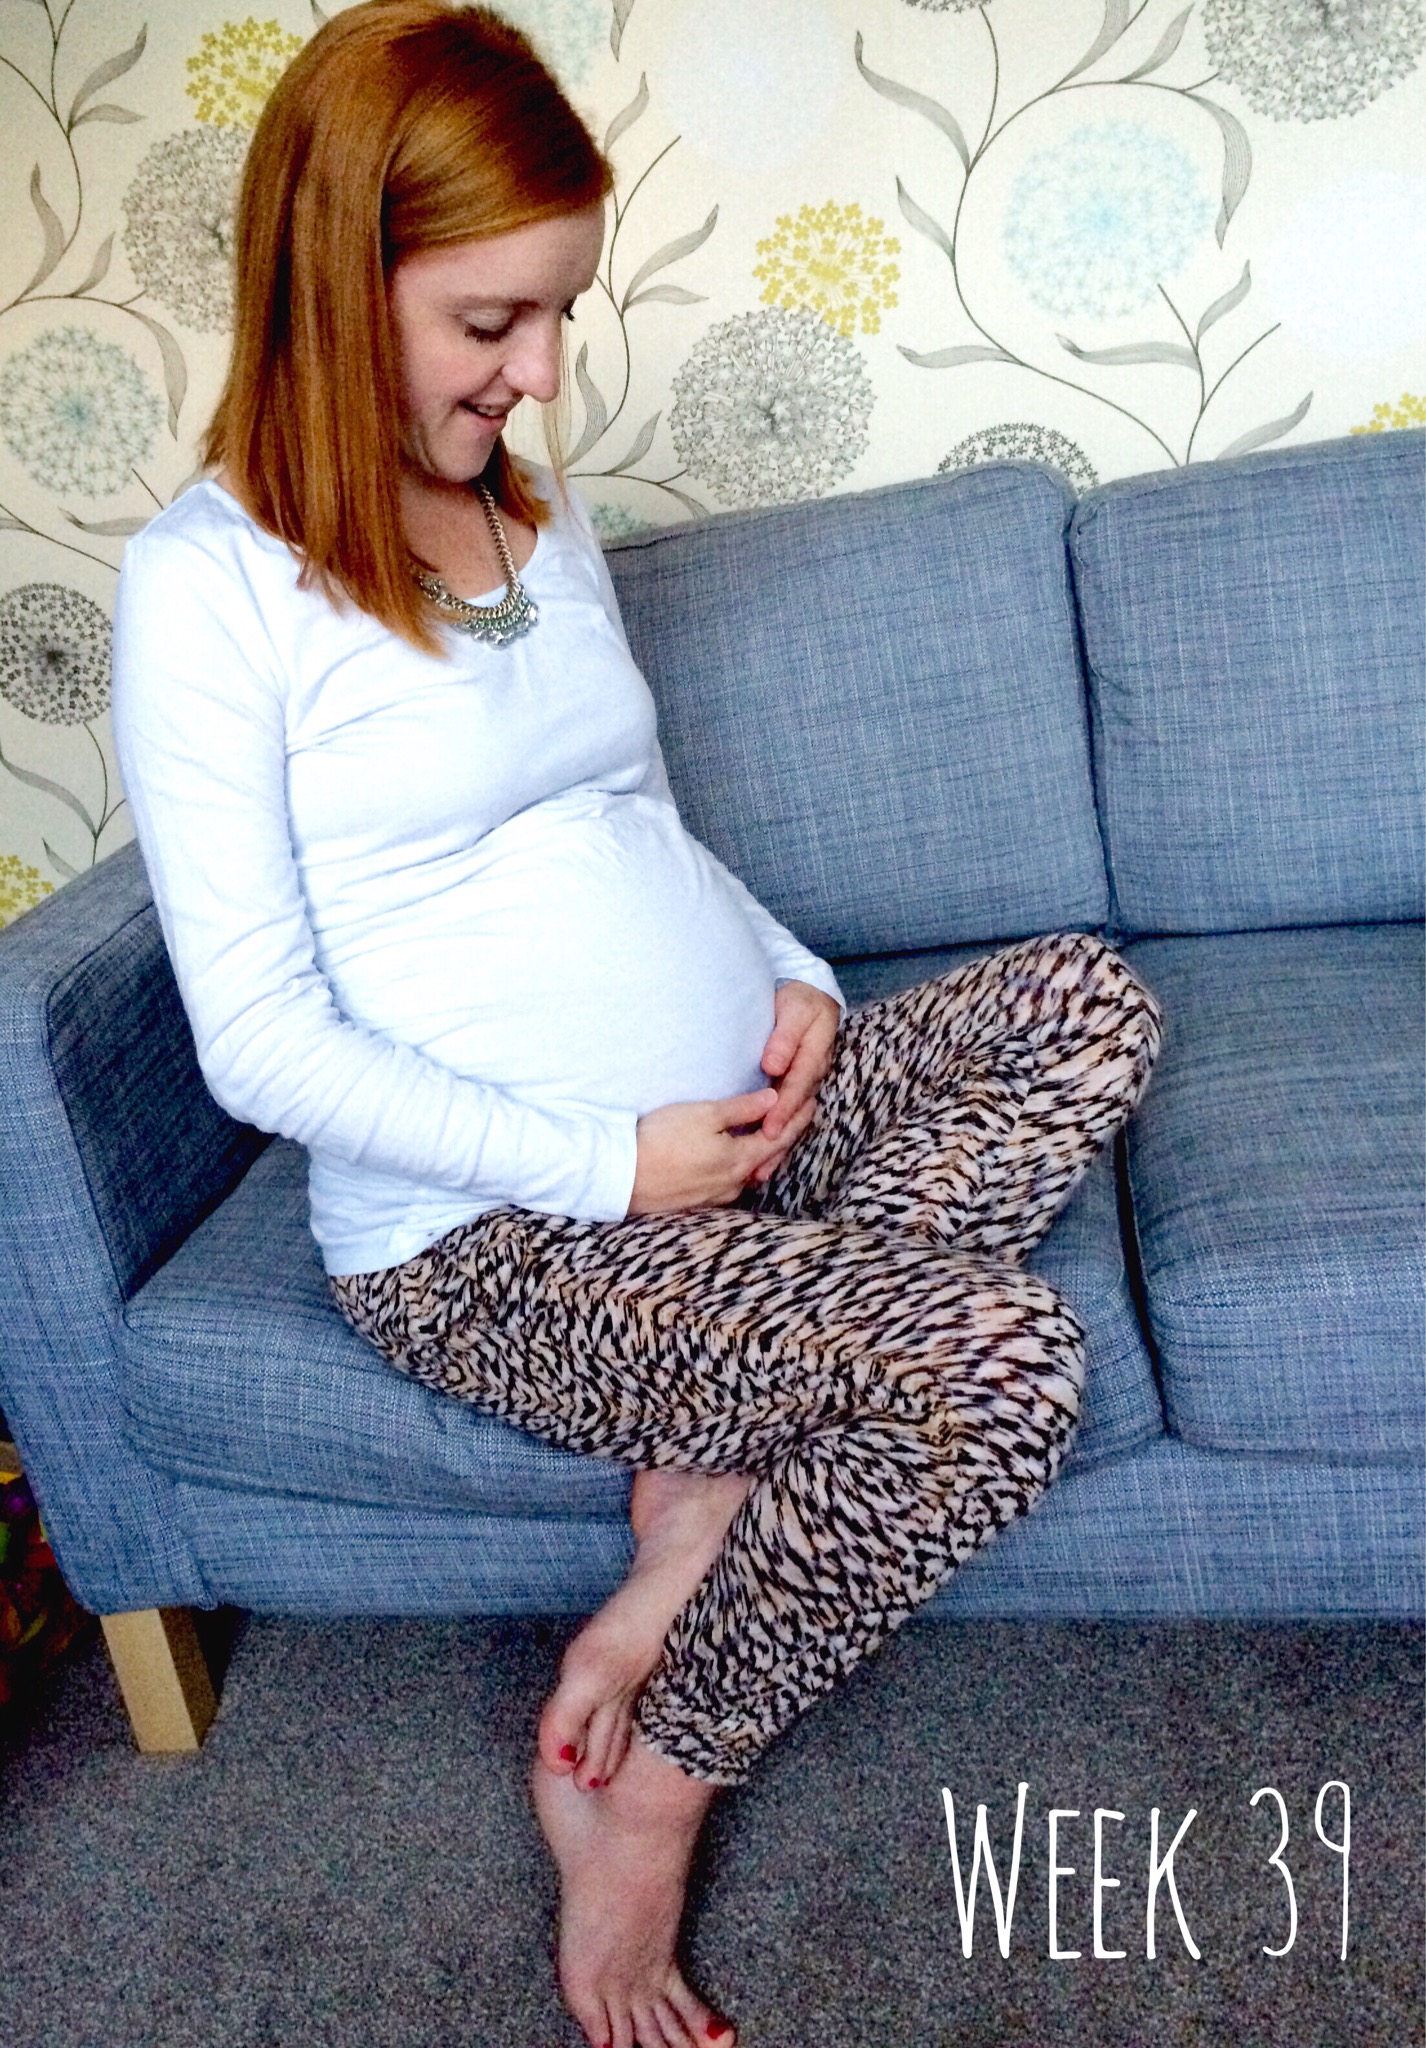 39 weeks pregnant - pregnancy bump shot in the third trimester